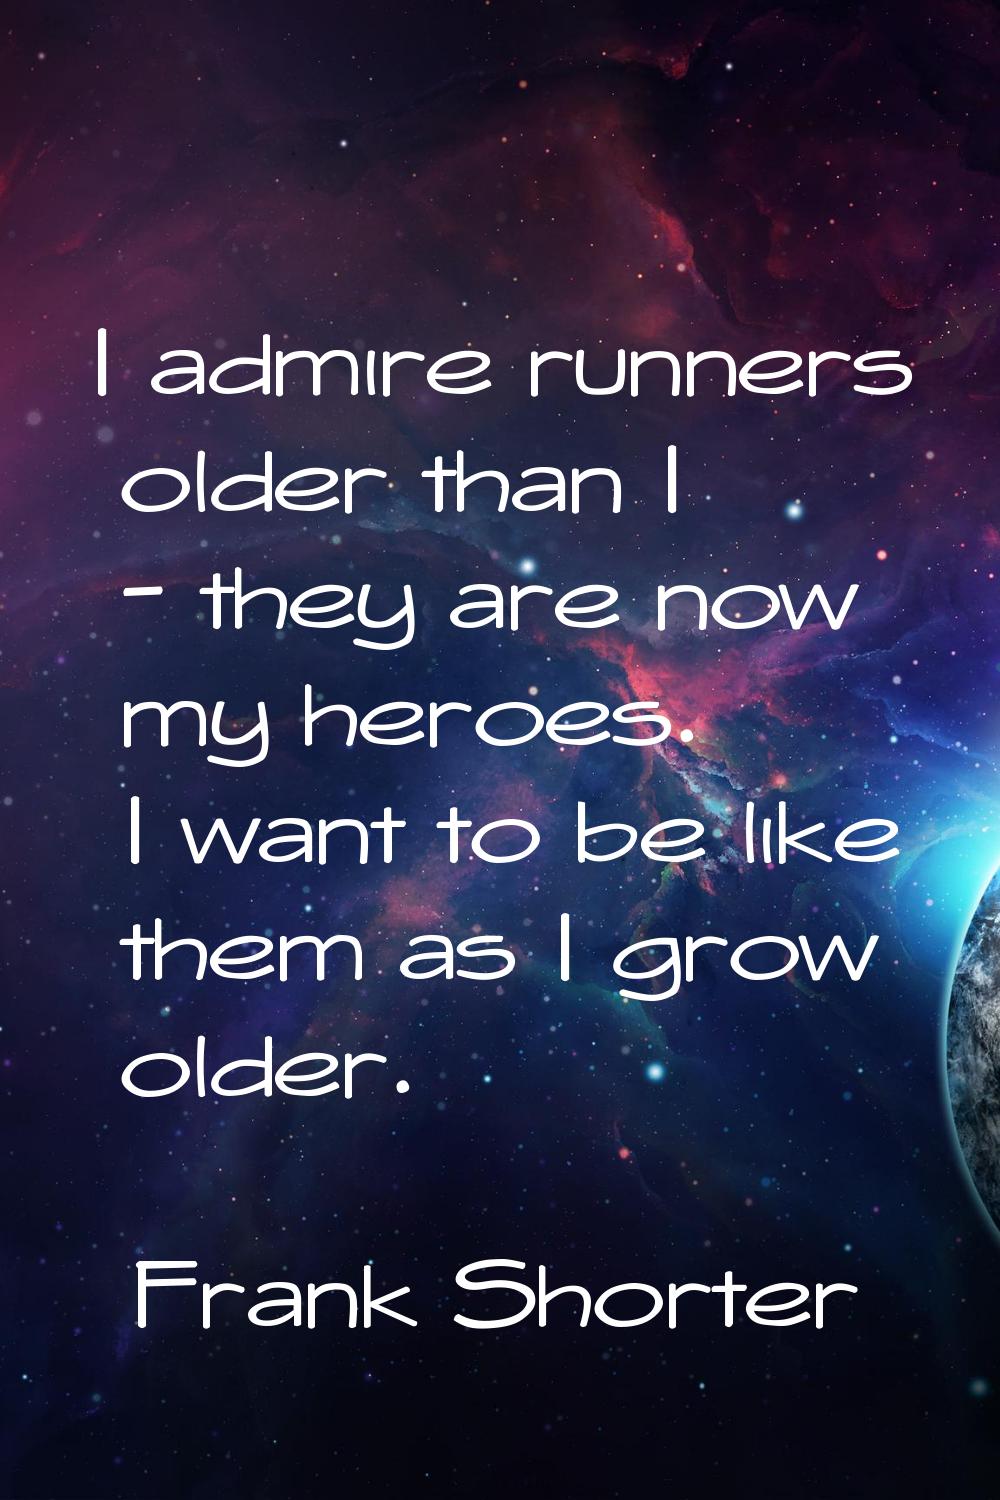 I admire runners older than I - they are now my heroes. I want to be like them as I grow older.